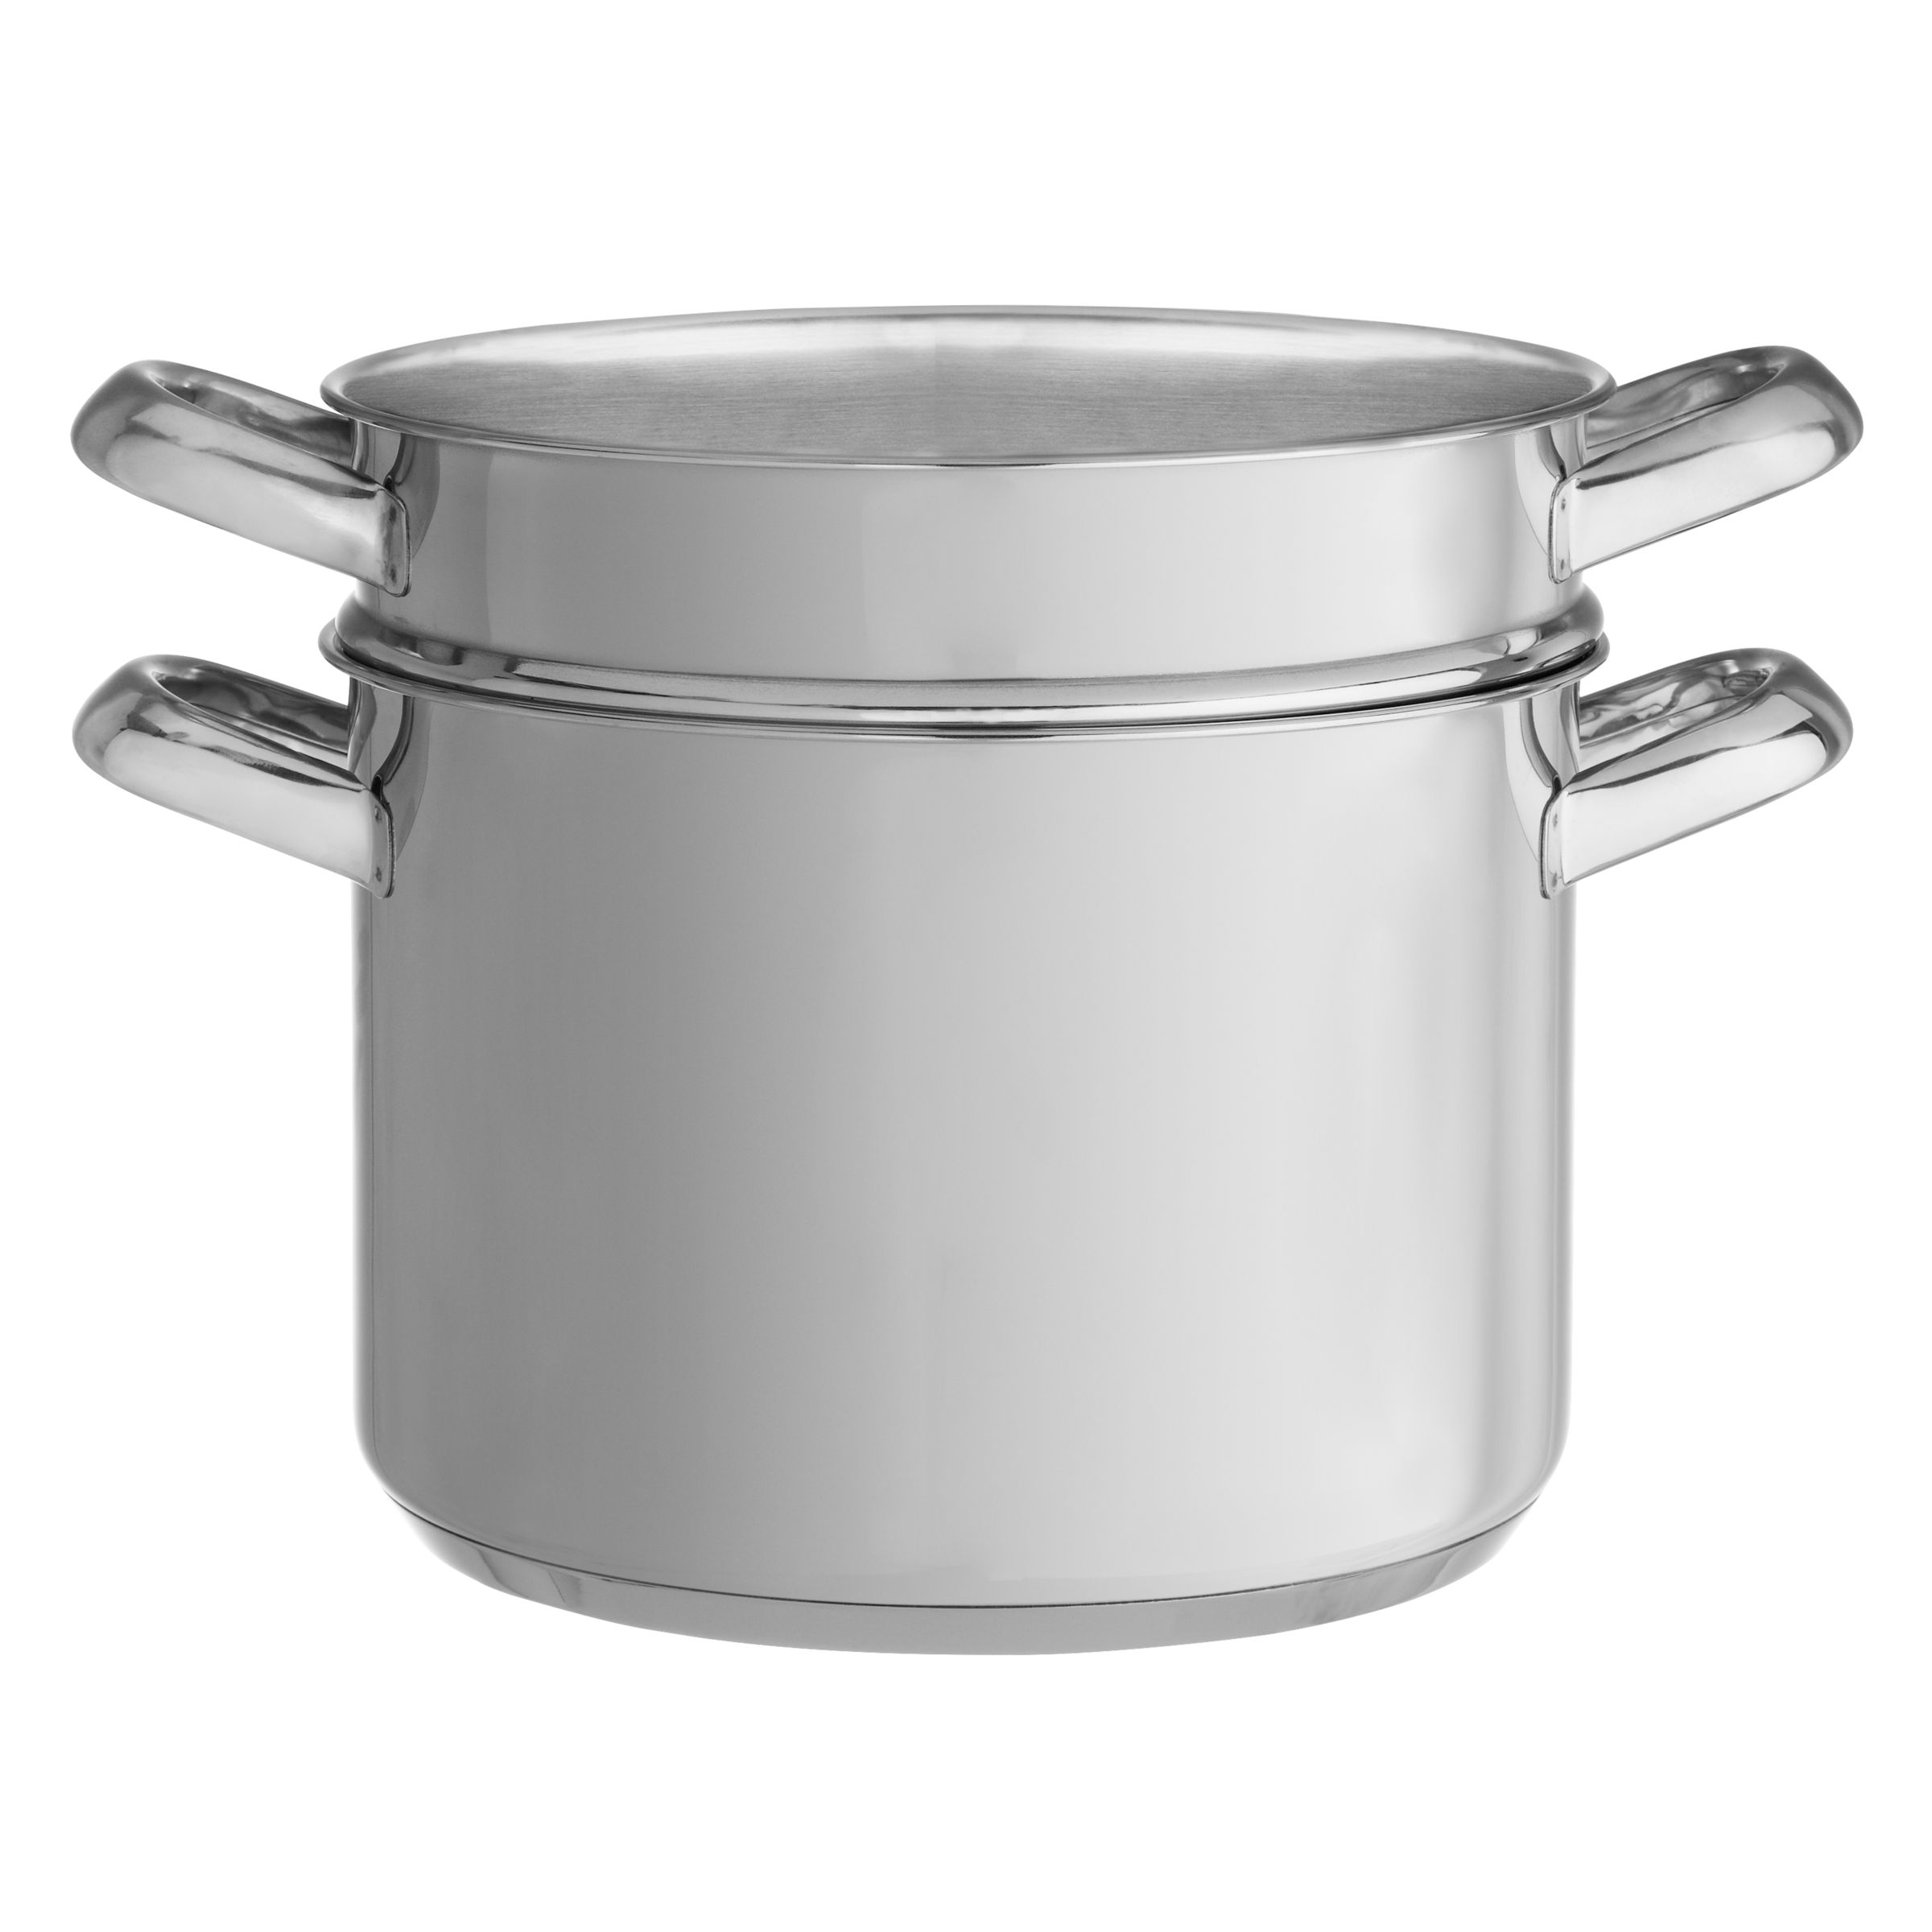 Speciality Stainless Steel Pasta Pot